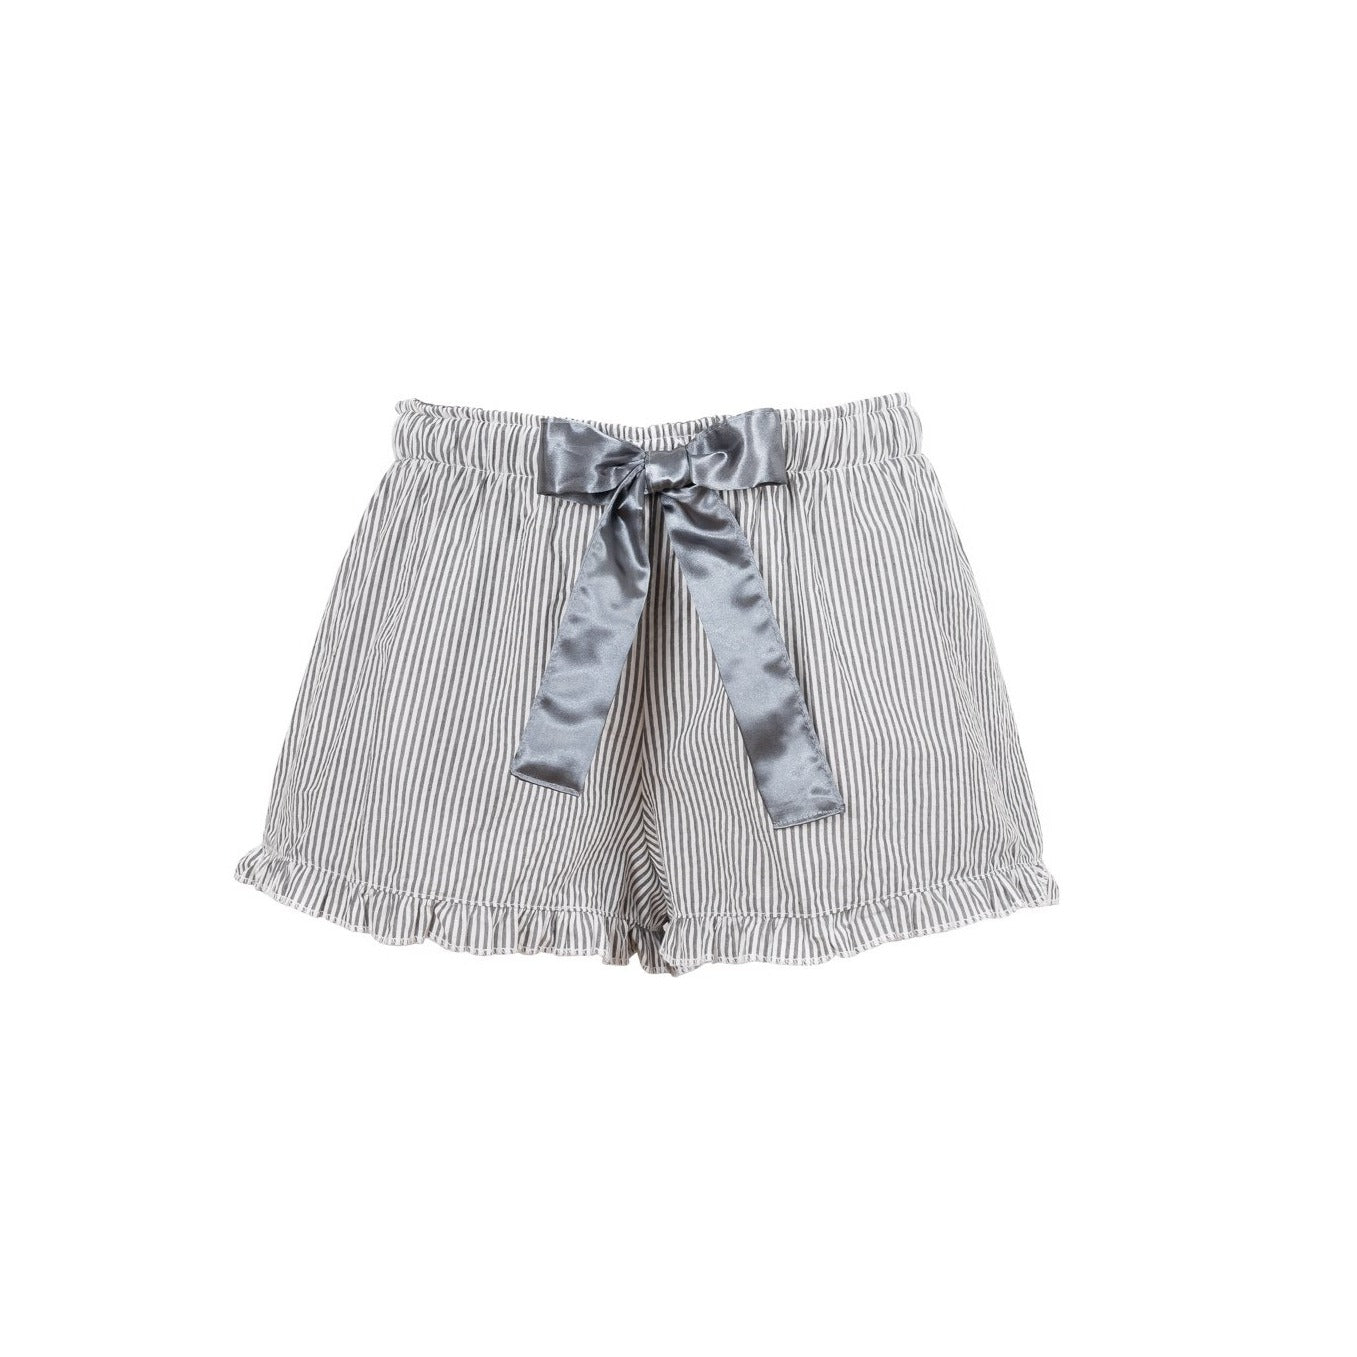 Grey striped seersucker shorts with a grey satin bow.